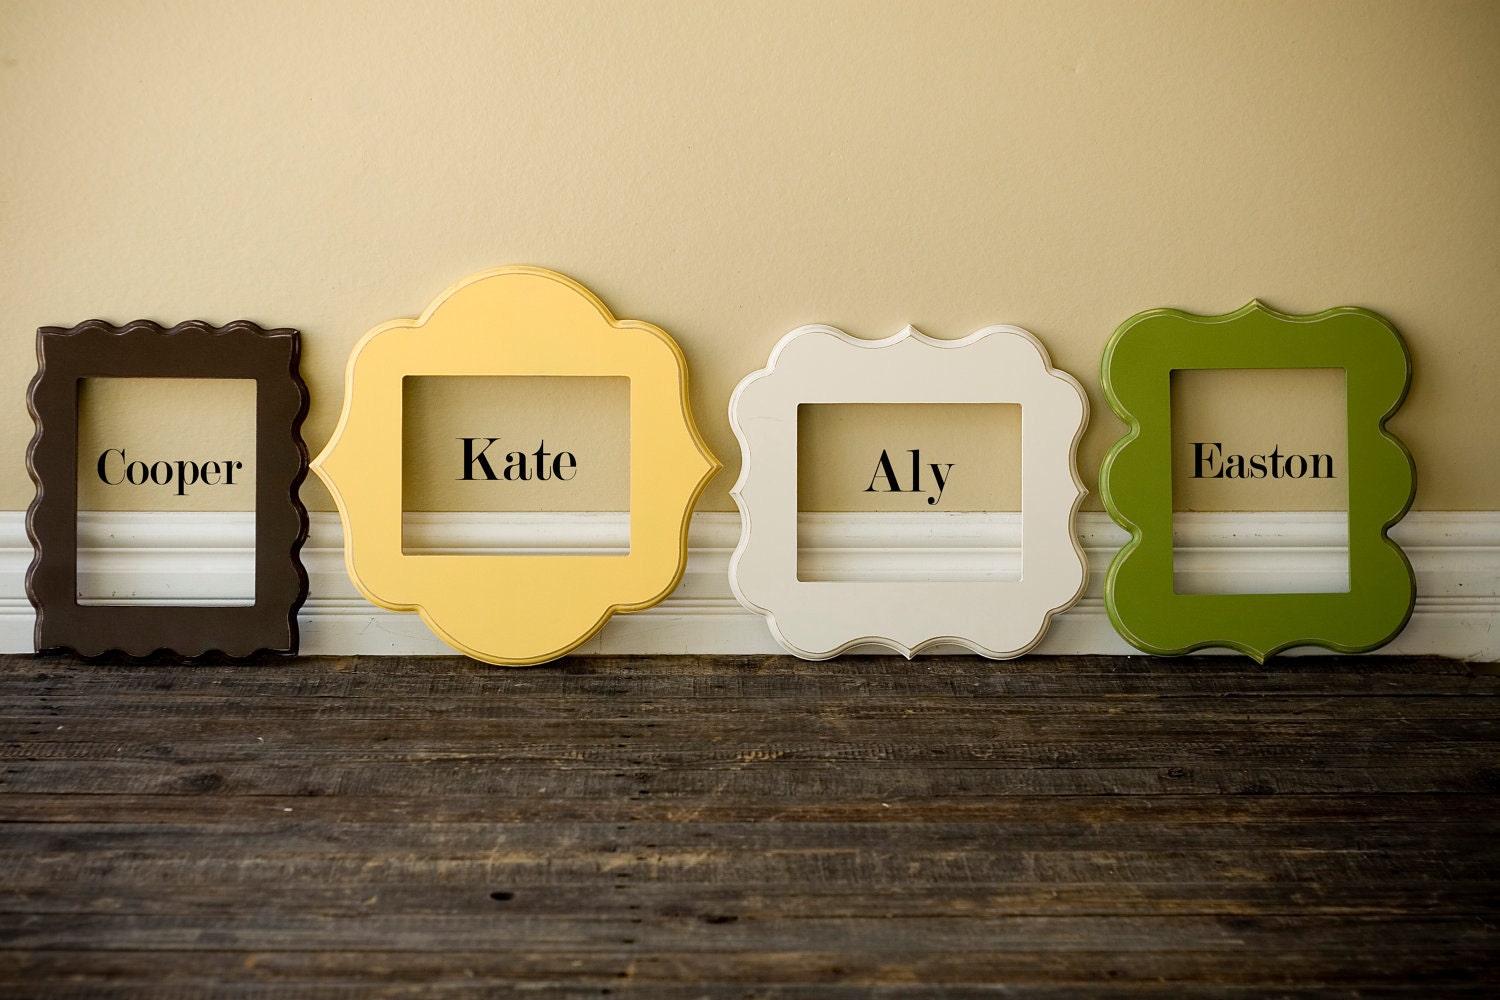 5x7 whimsical and unique picture frames. Pick your style and color